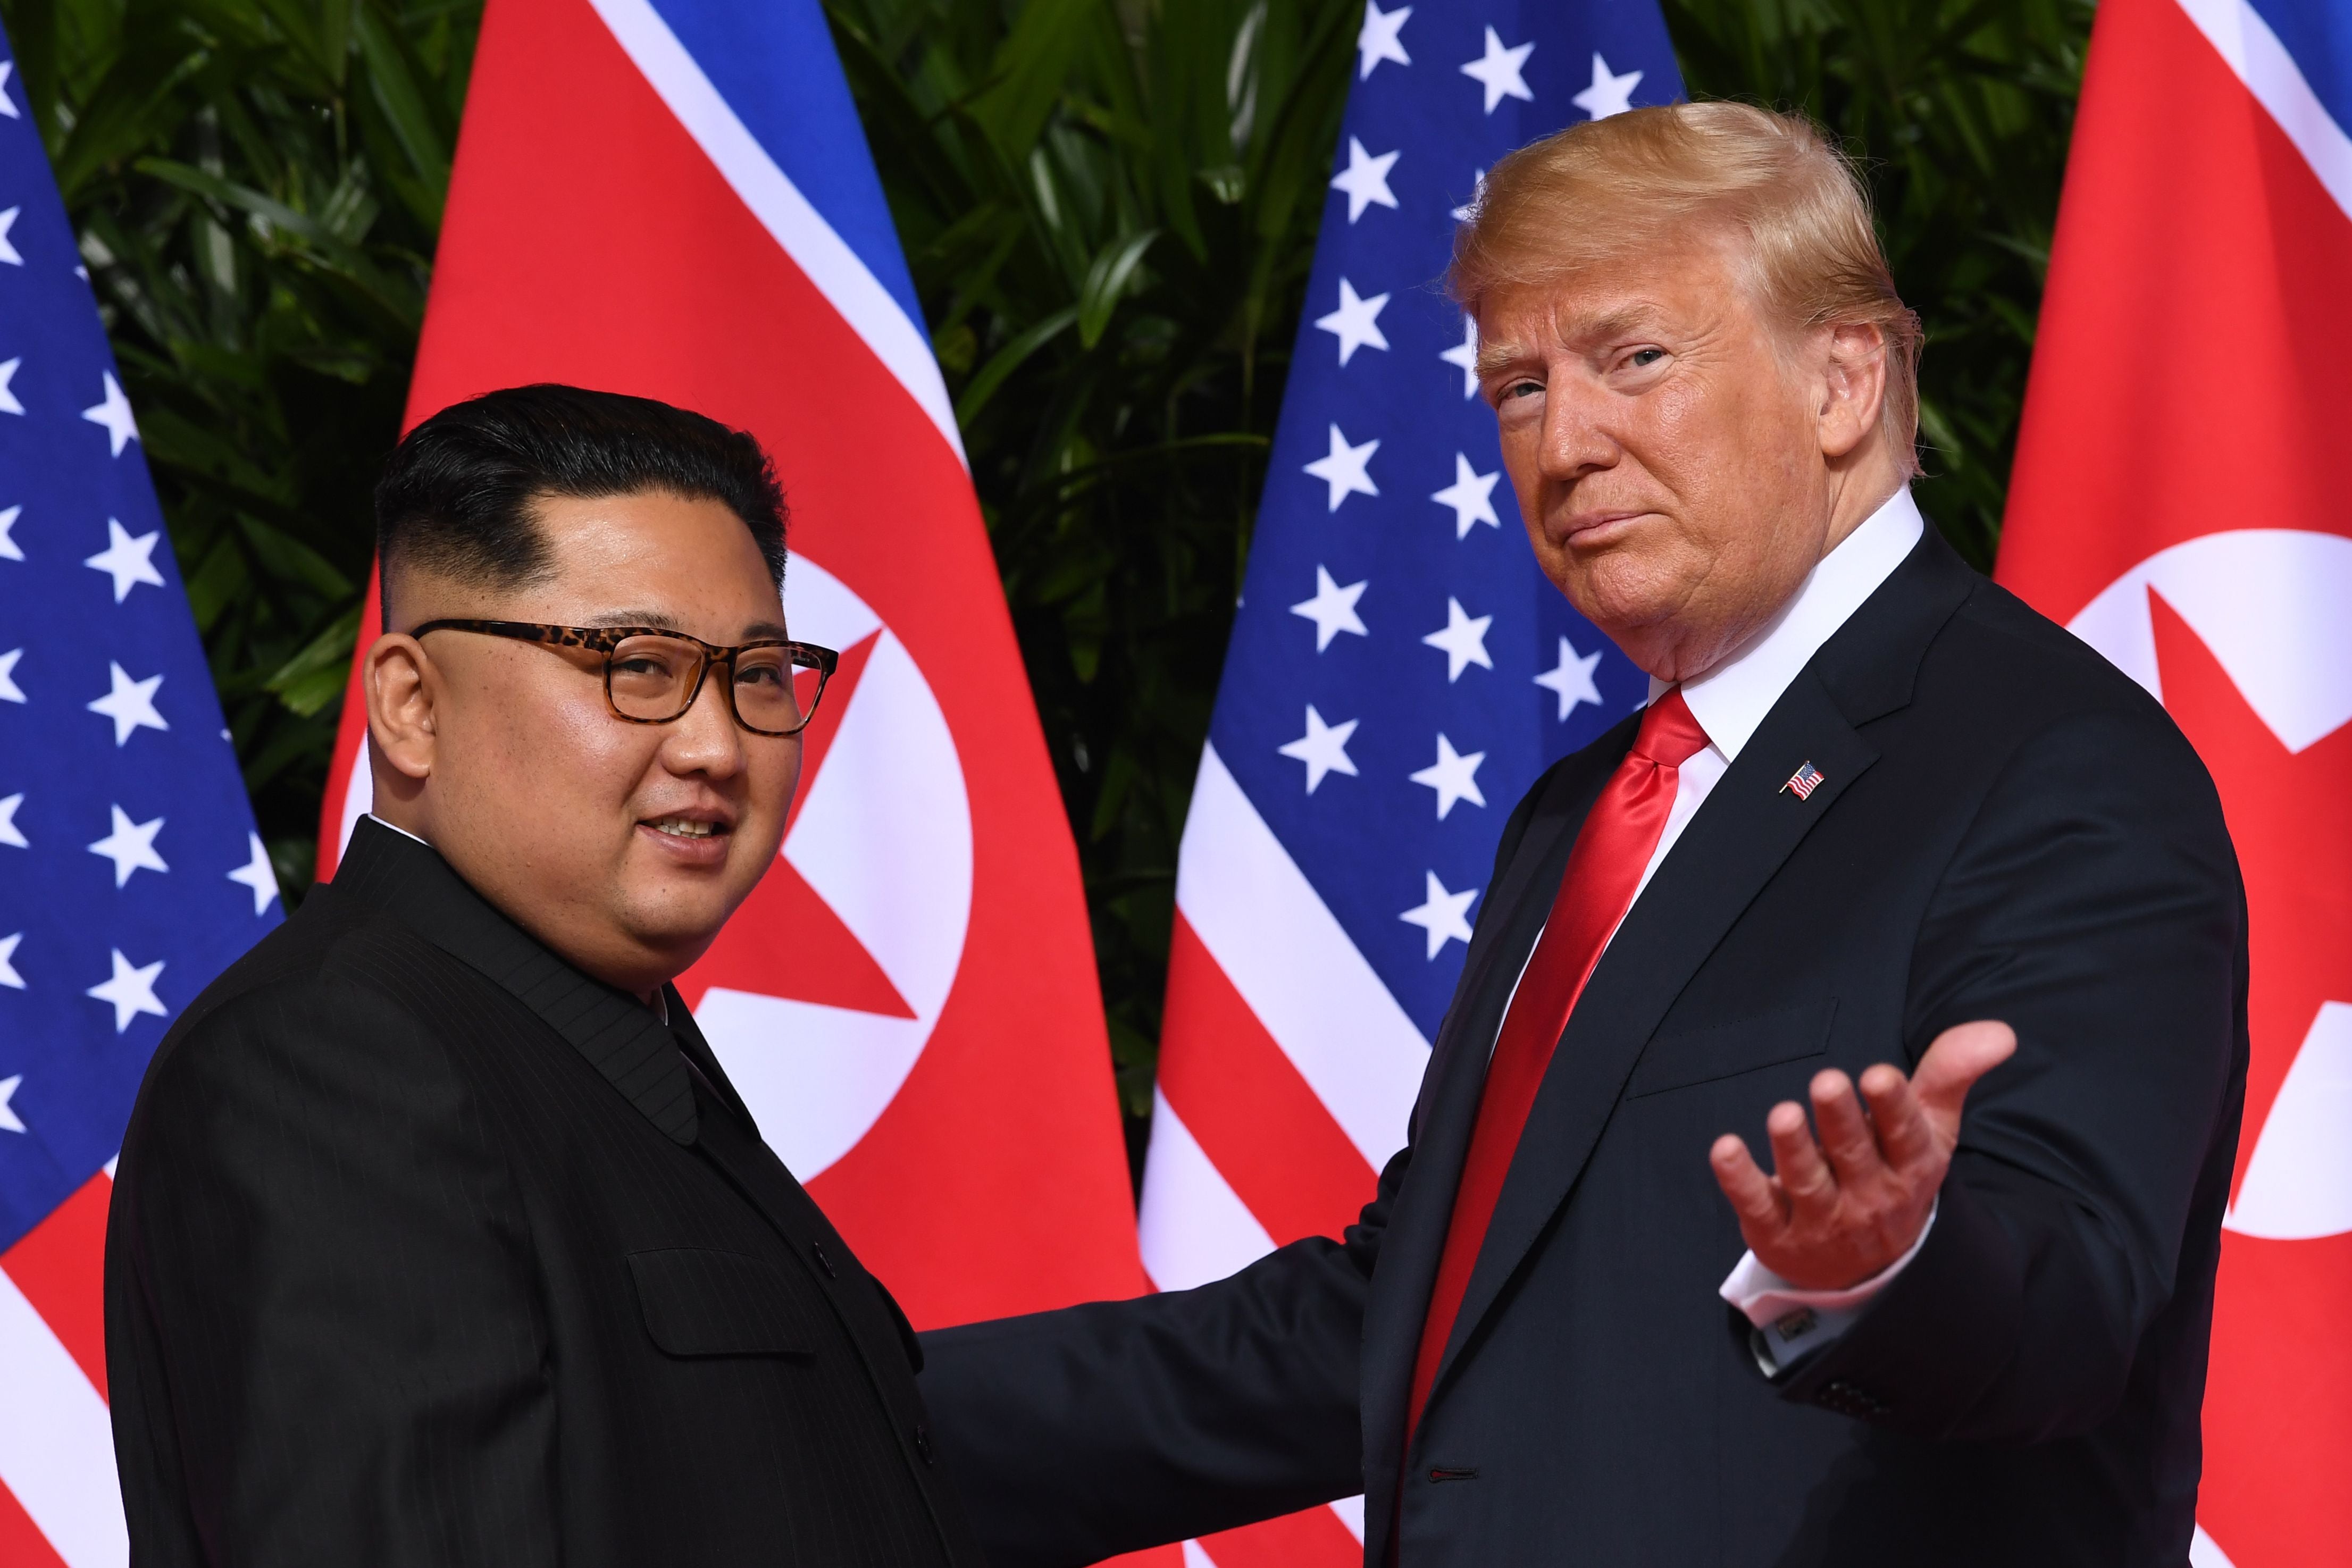 The US president meets with his North Korean counterpart at their summit in Singapore in June 2018